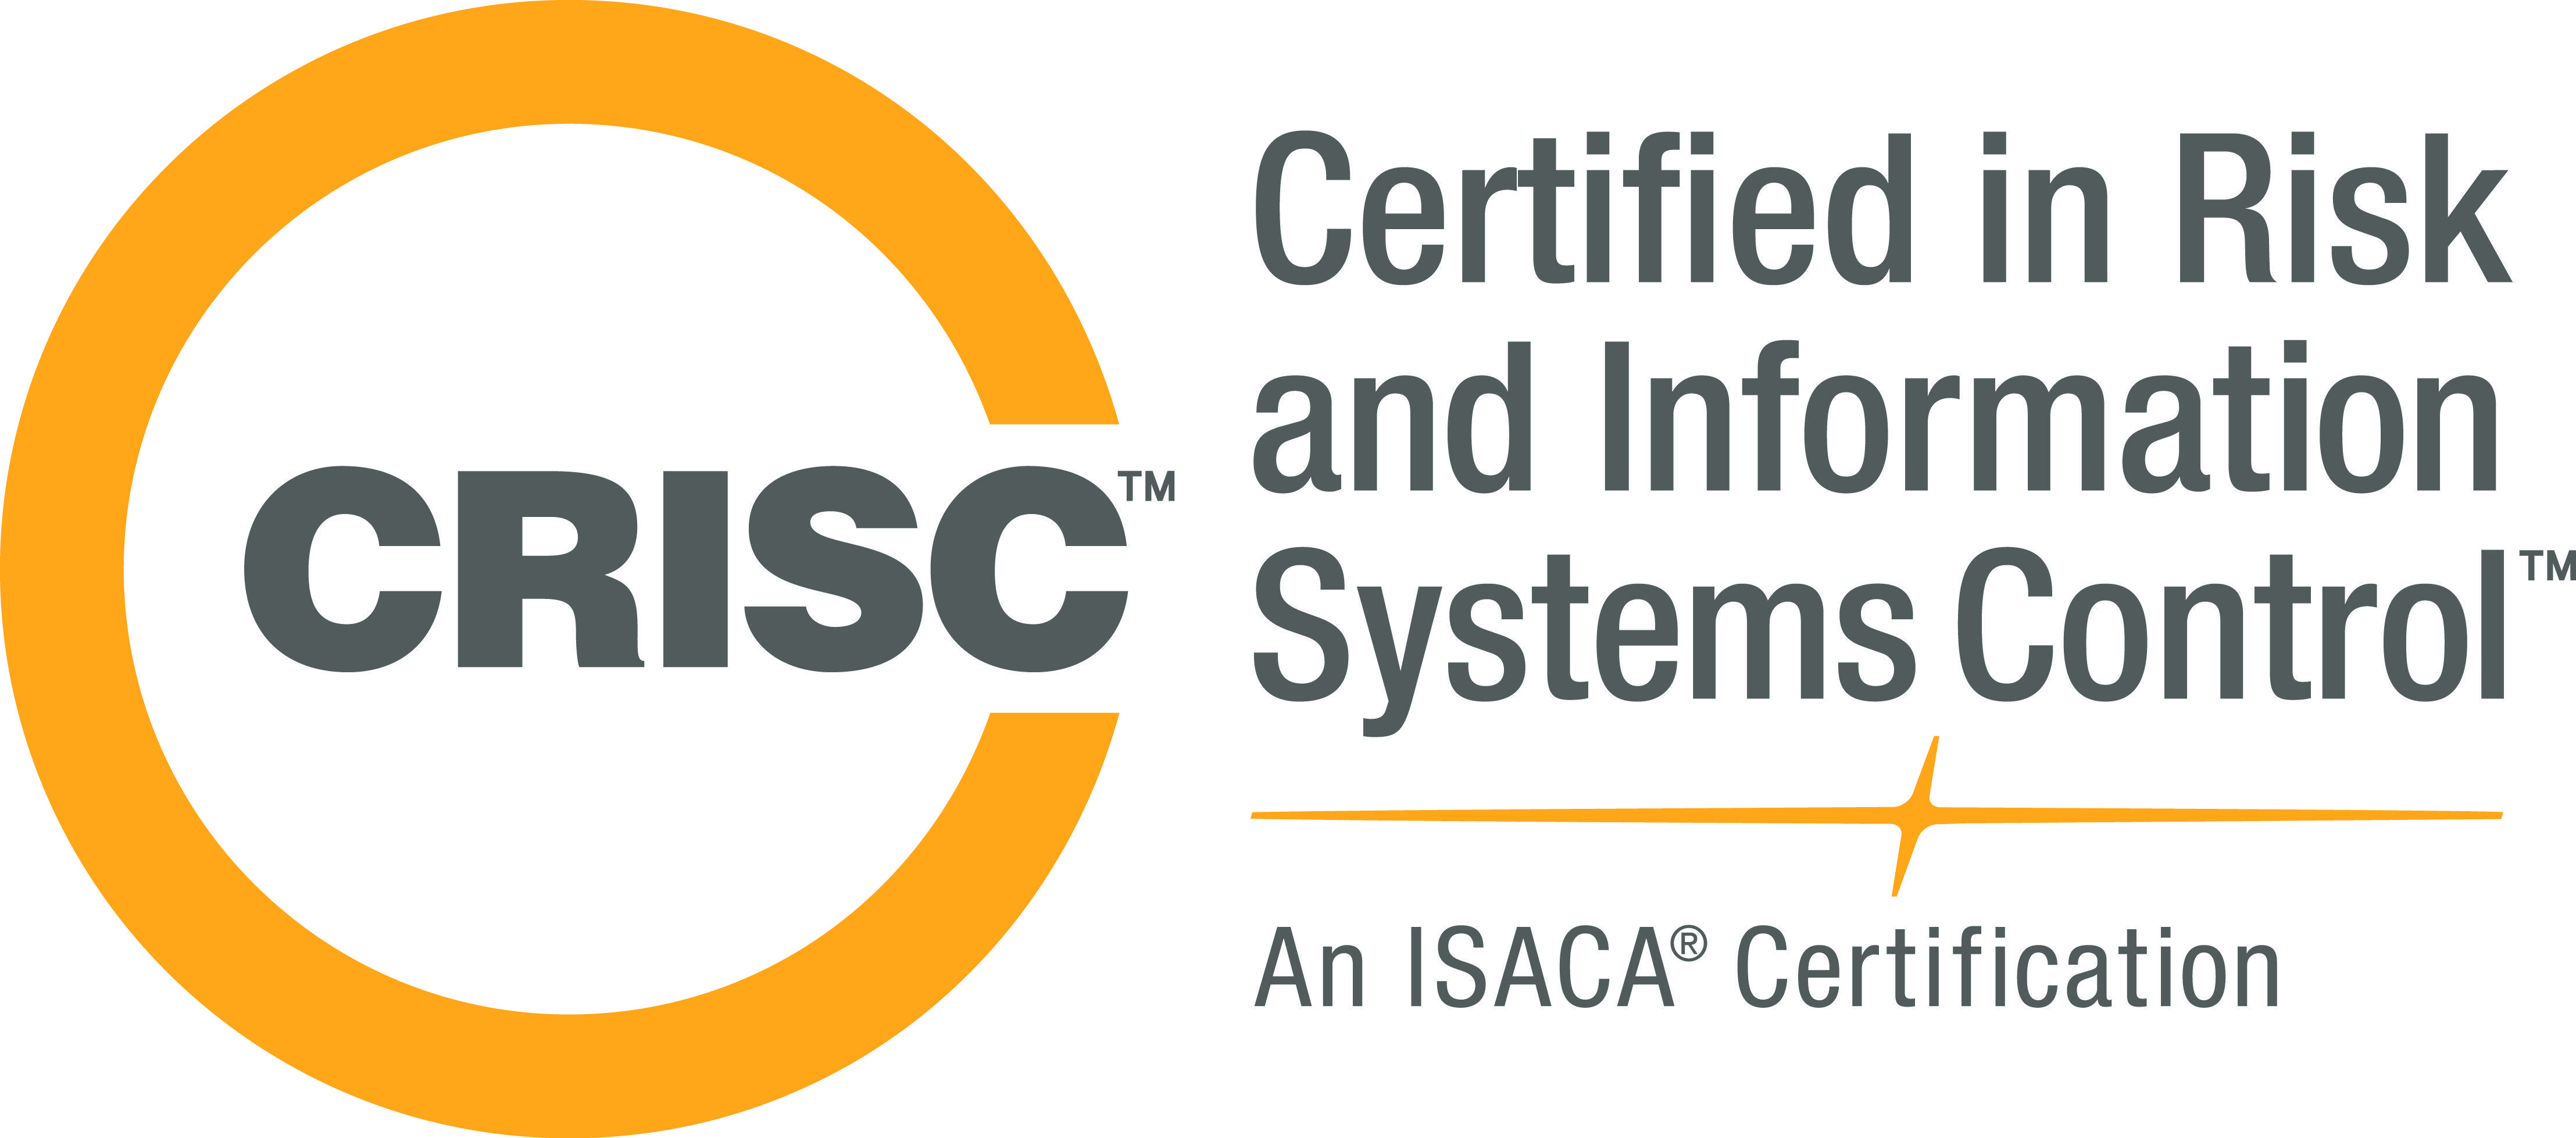 CRISC Logo - Certified in Risk & Information Systems Control (CRISC) Exam Overview